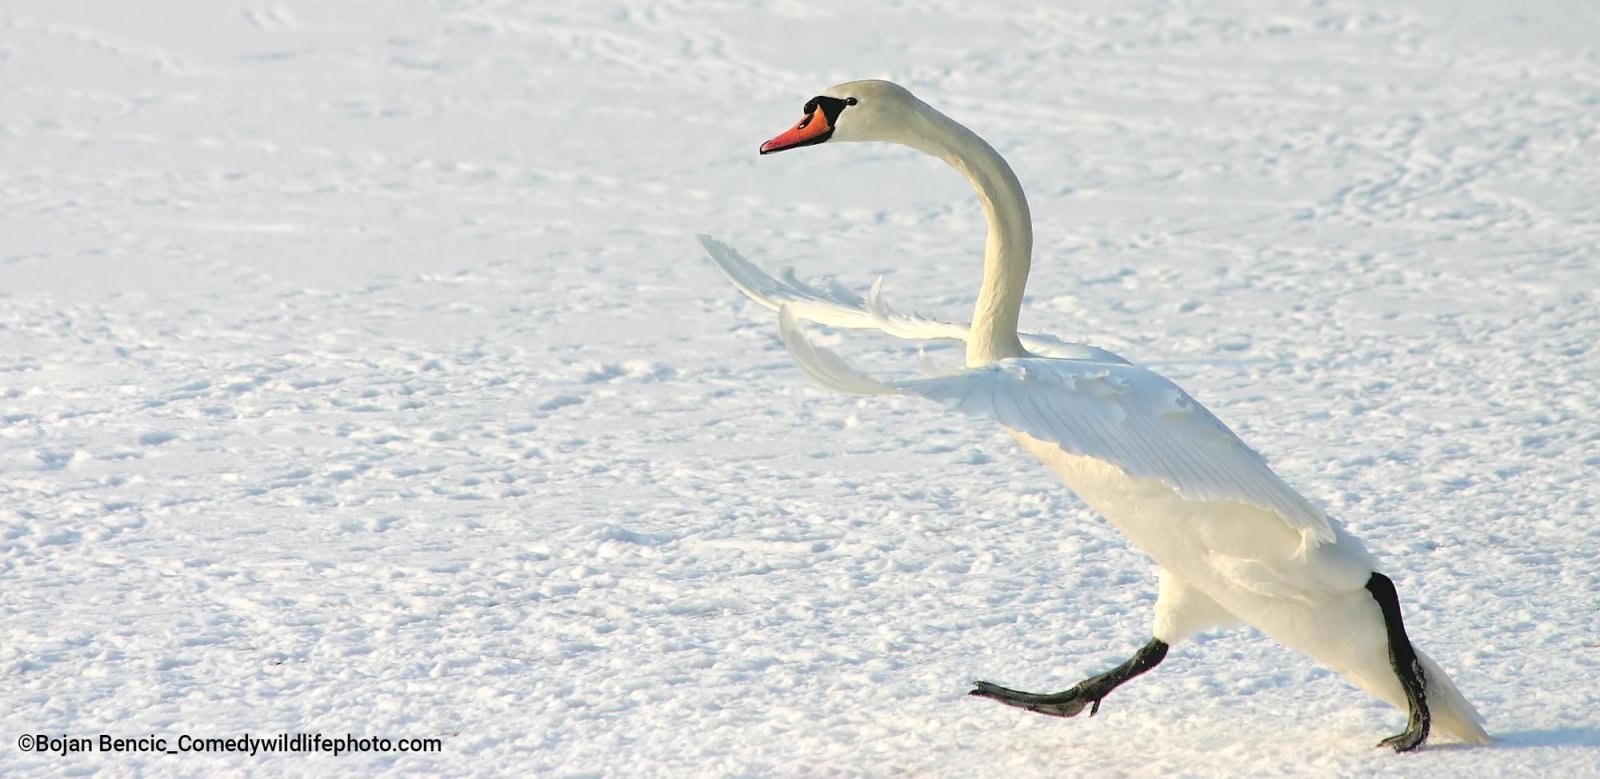 A swan runs across a frozen lake with its wings outstretched. 